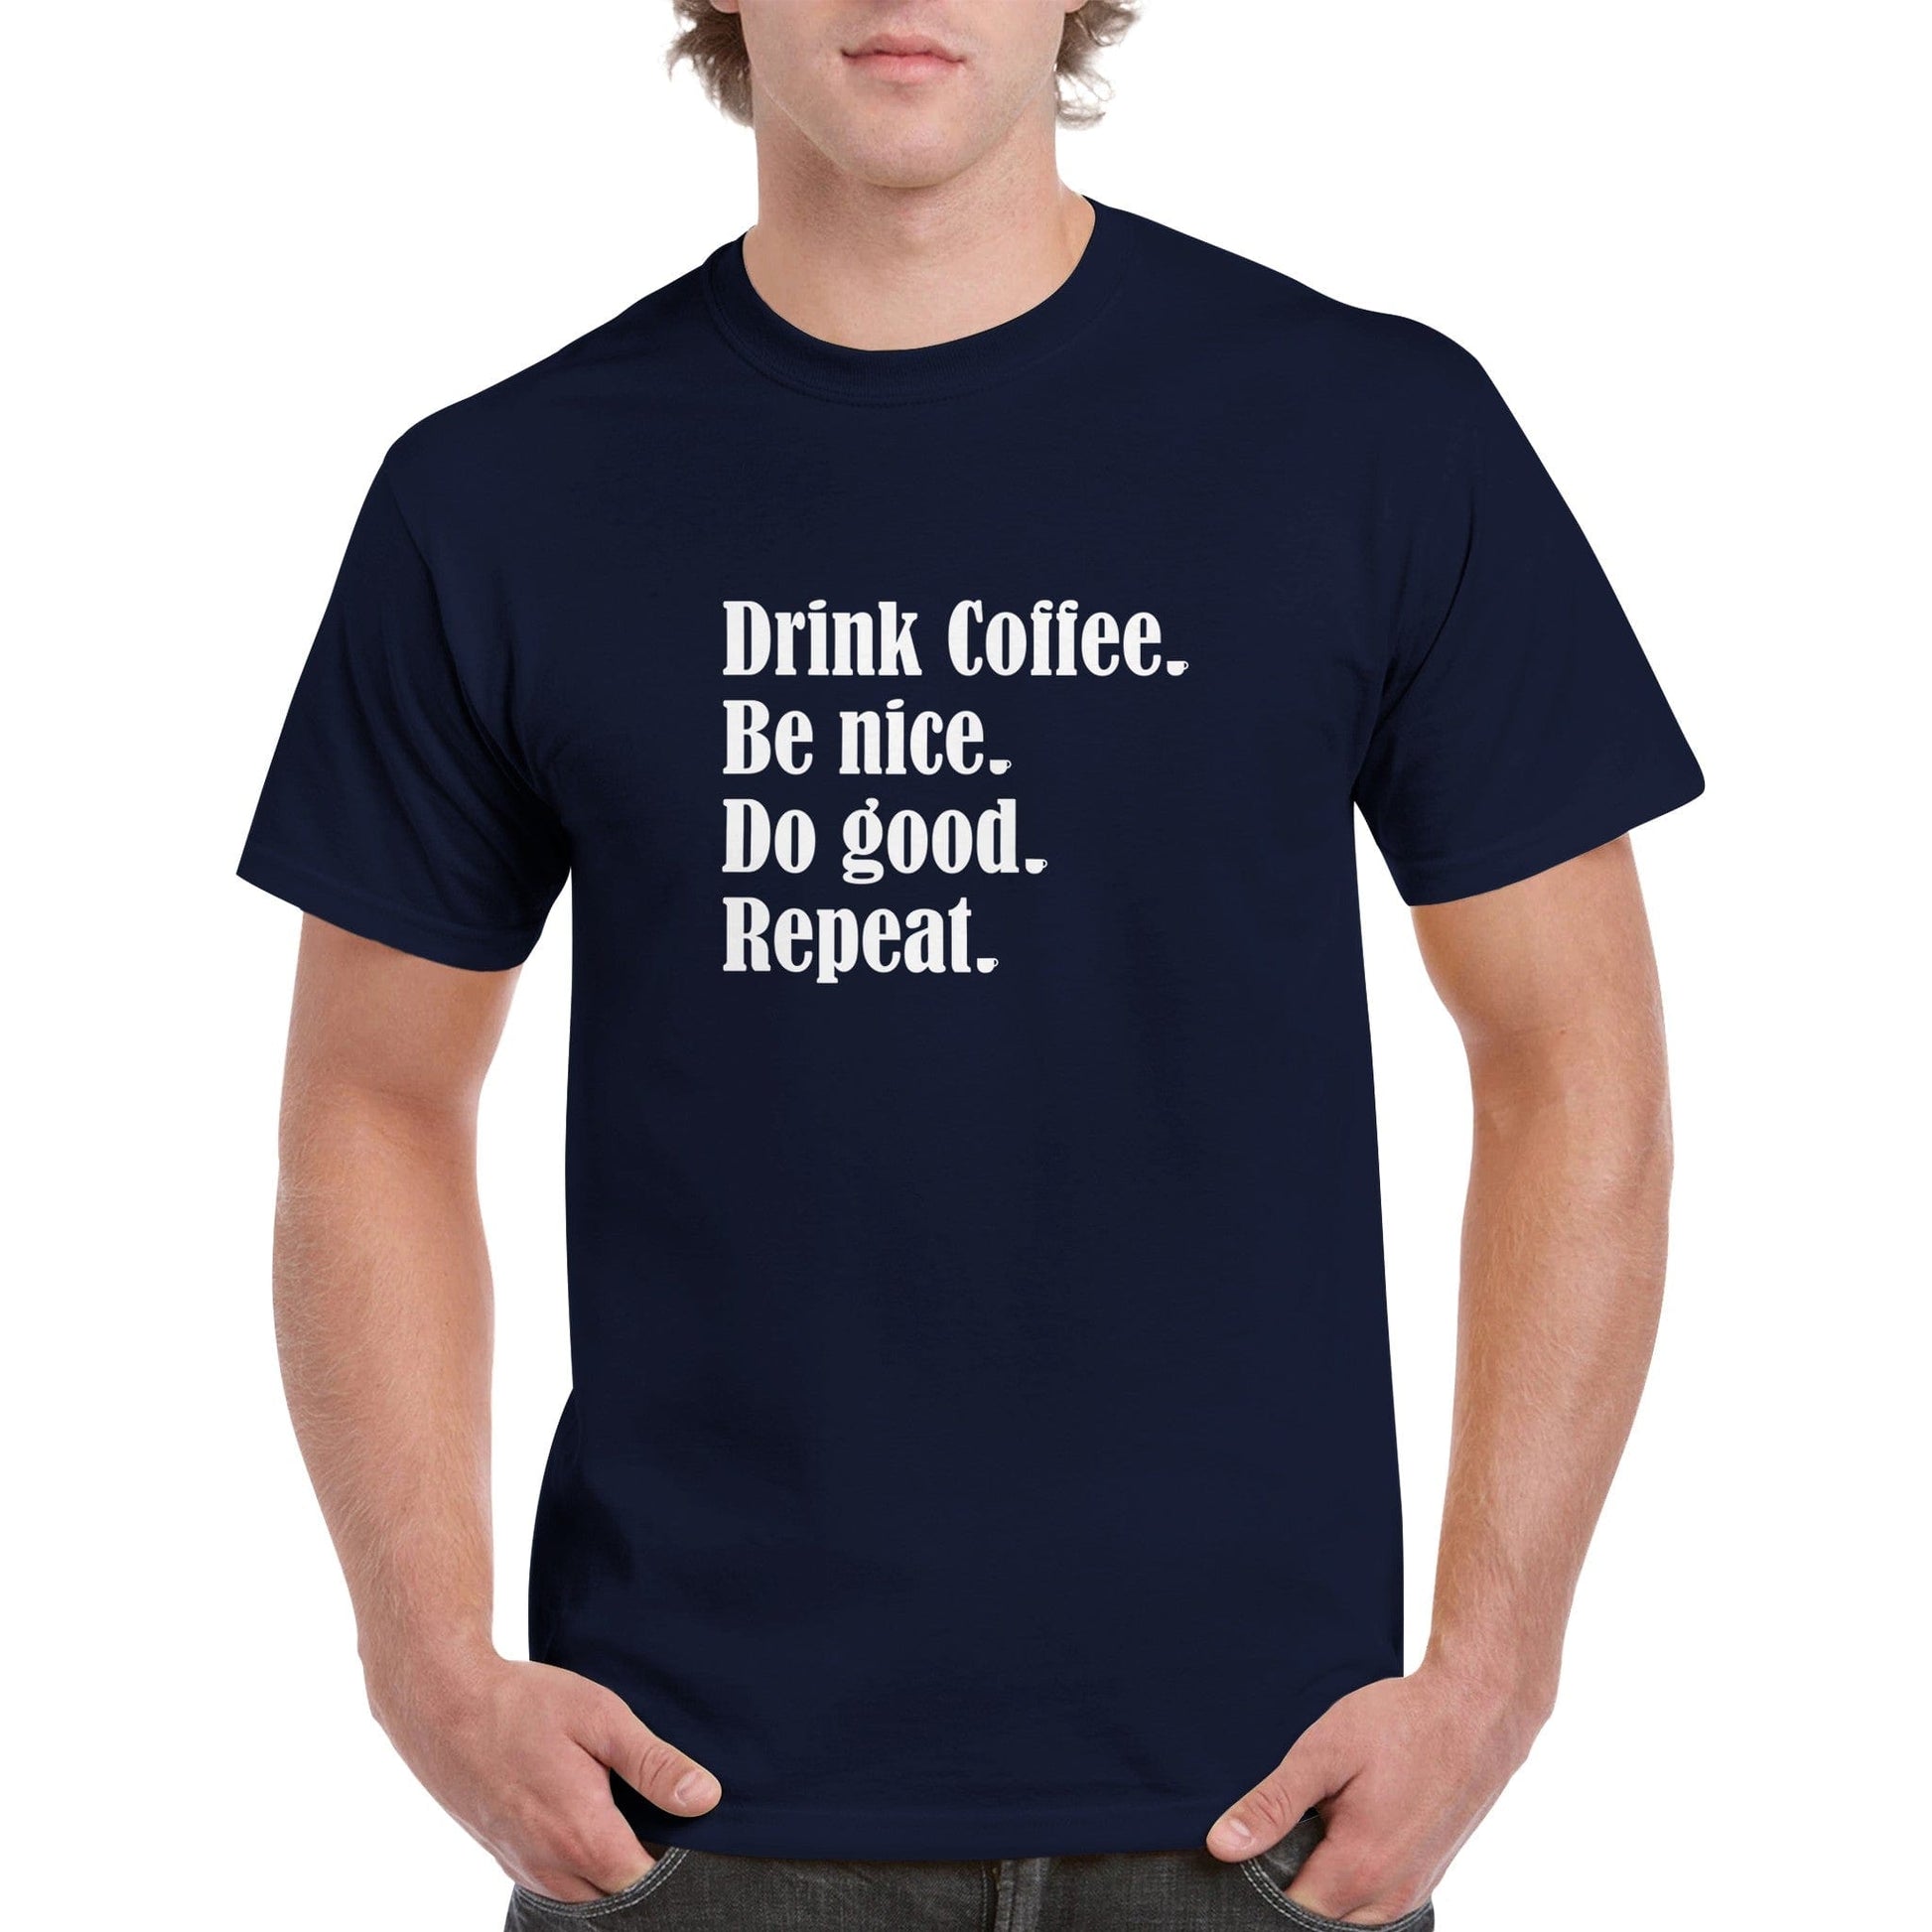 Good Bean Gifts Drink Coffee, Be Nice, Do Good, Repeat - Crewneck T-shirt Navy / S